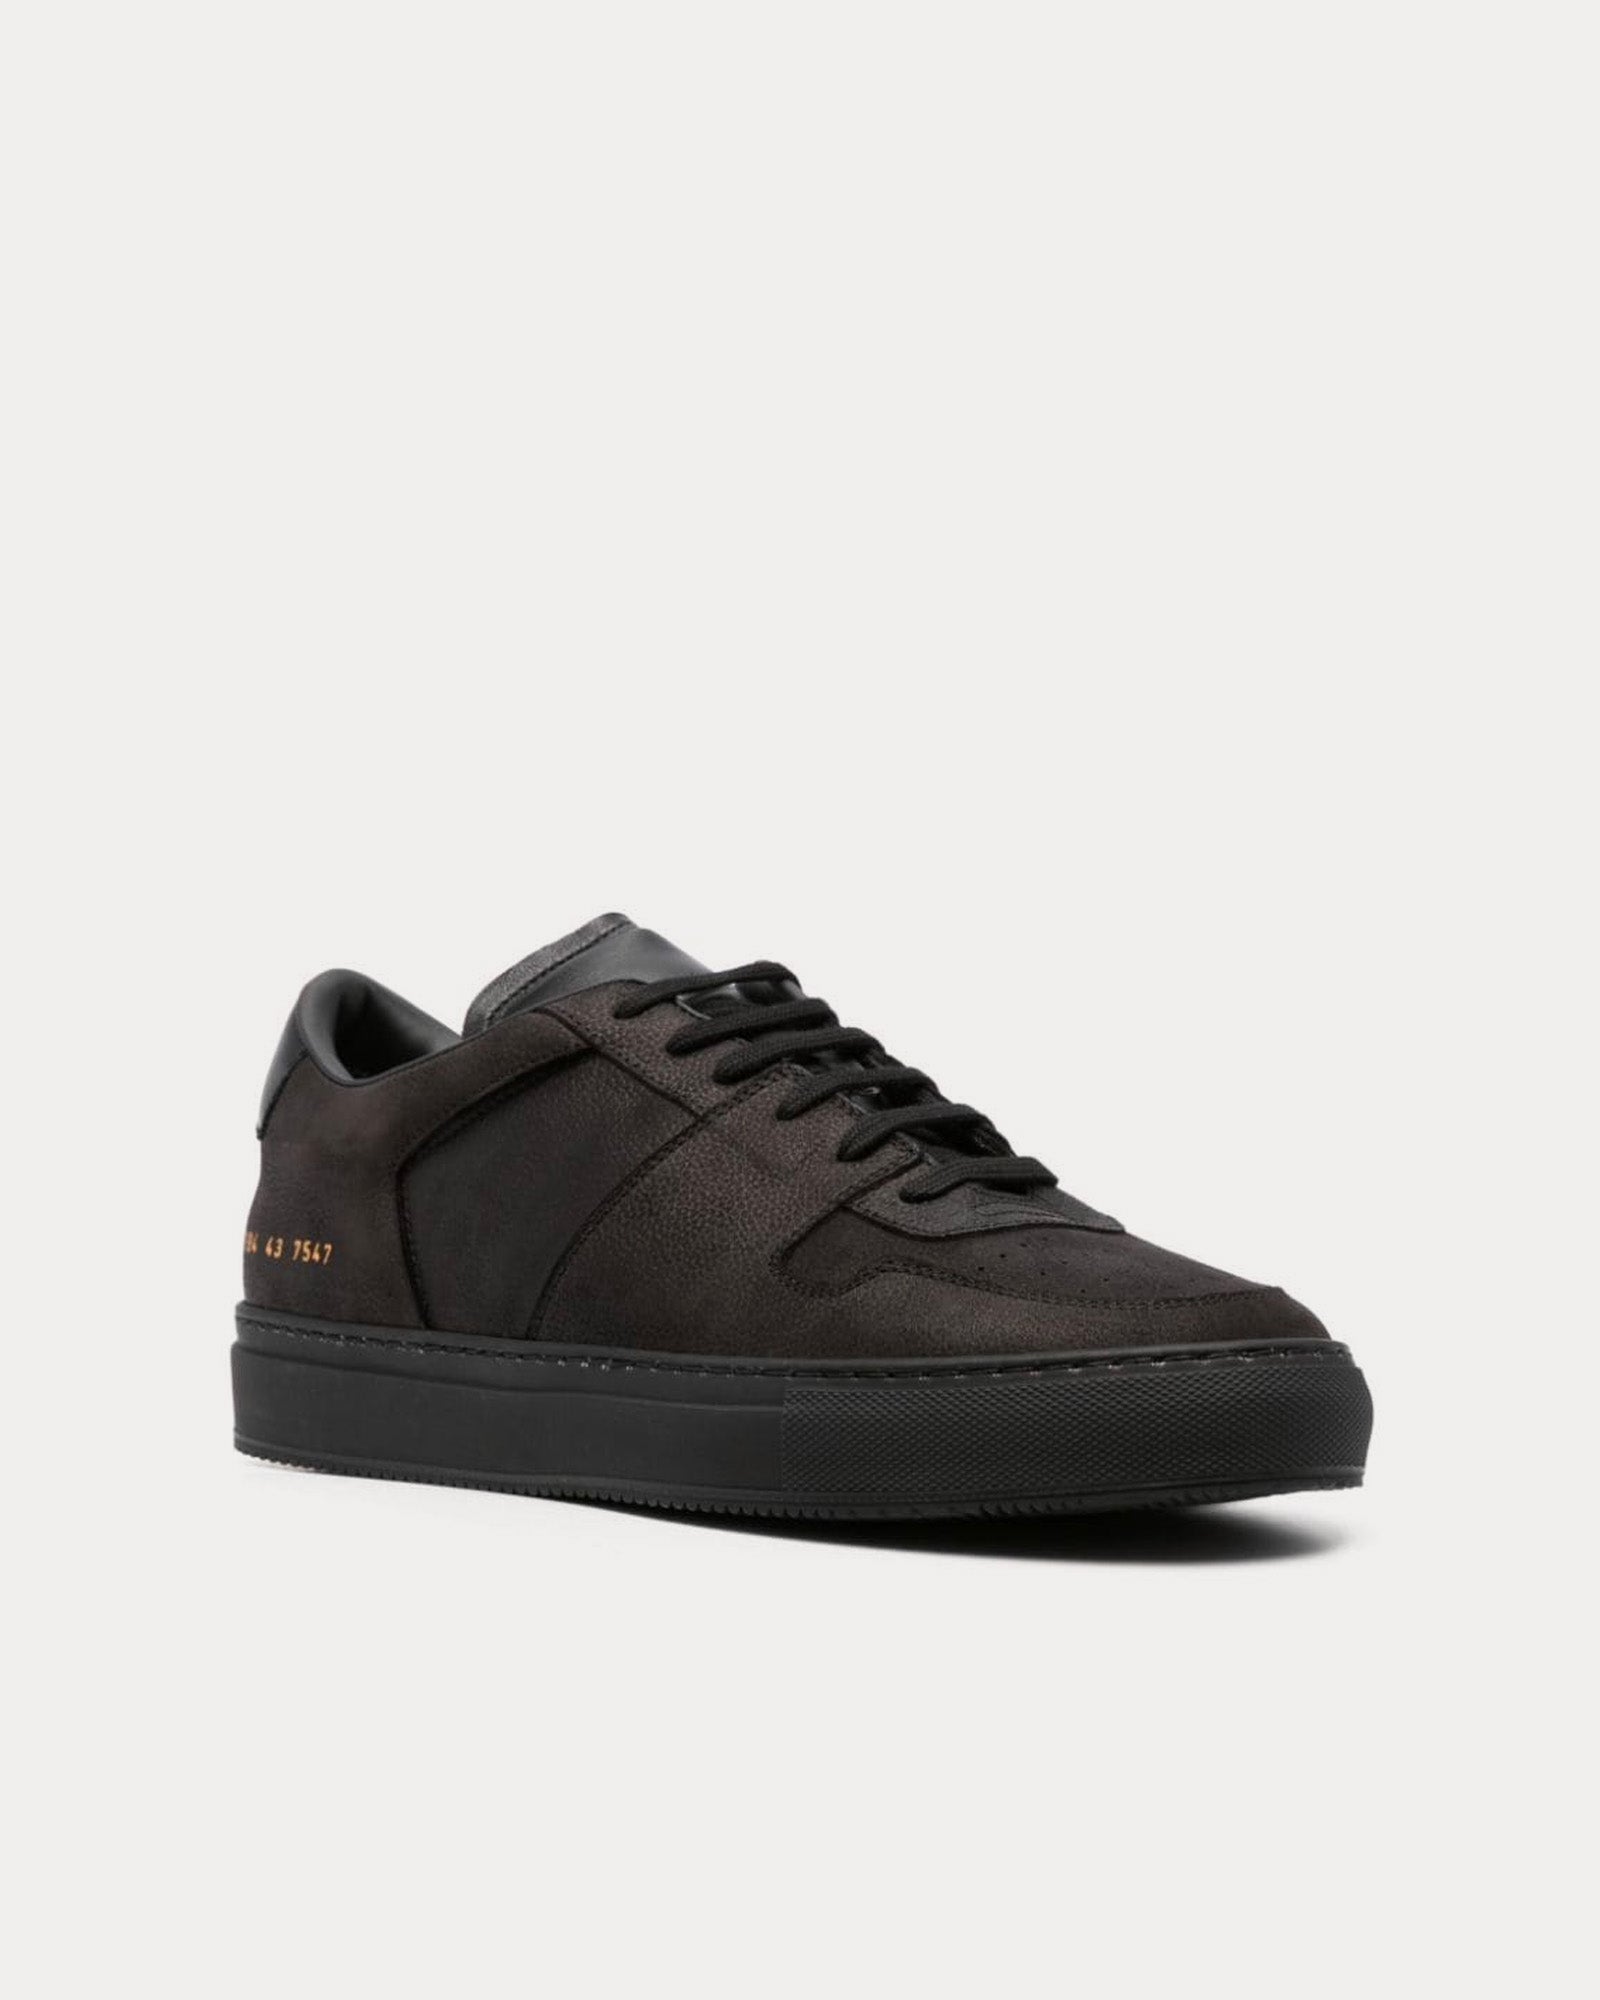 Common Projects - Decades Calf-Leather Black / Black Low Top Sneakers